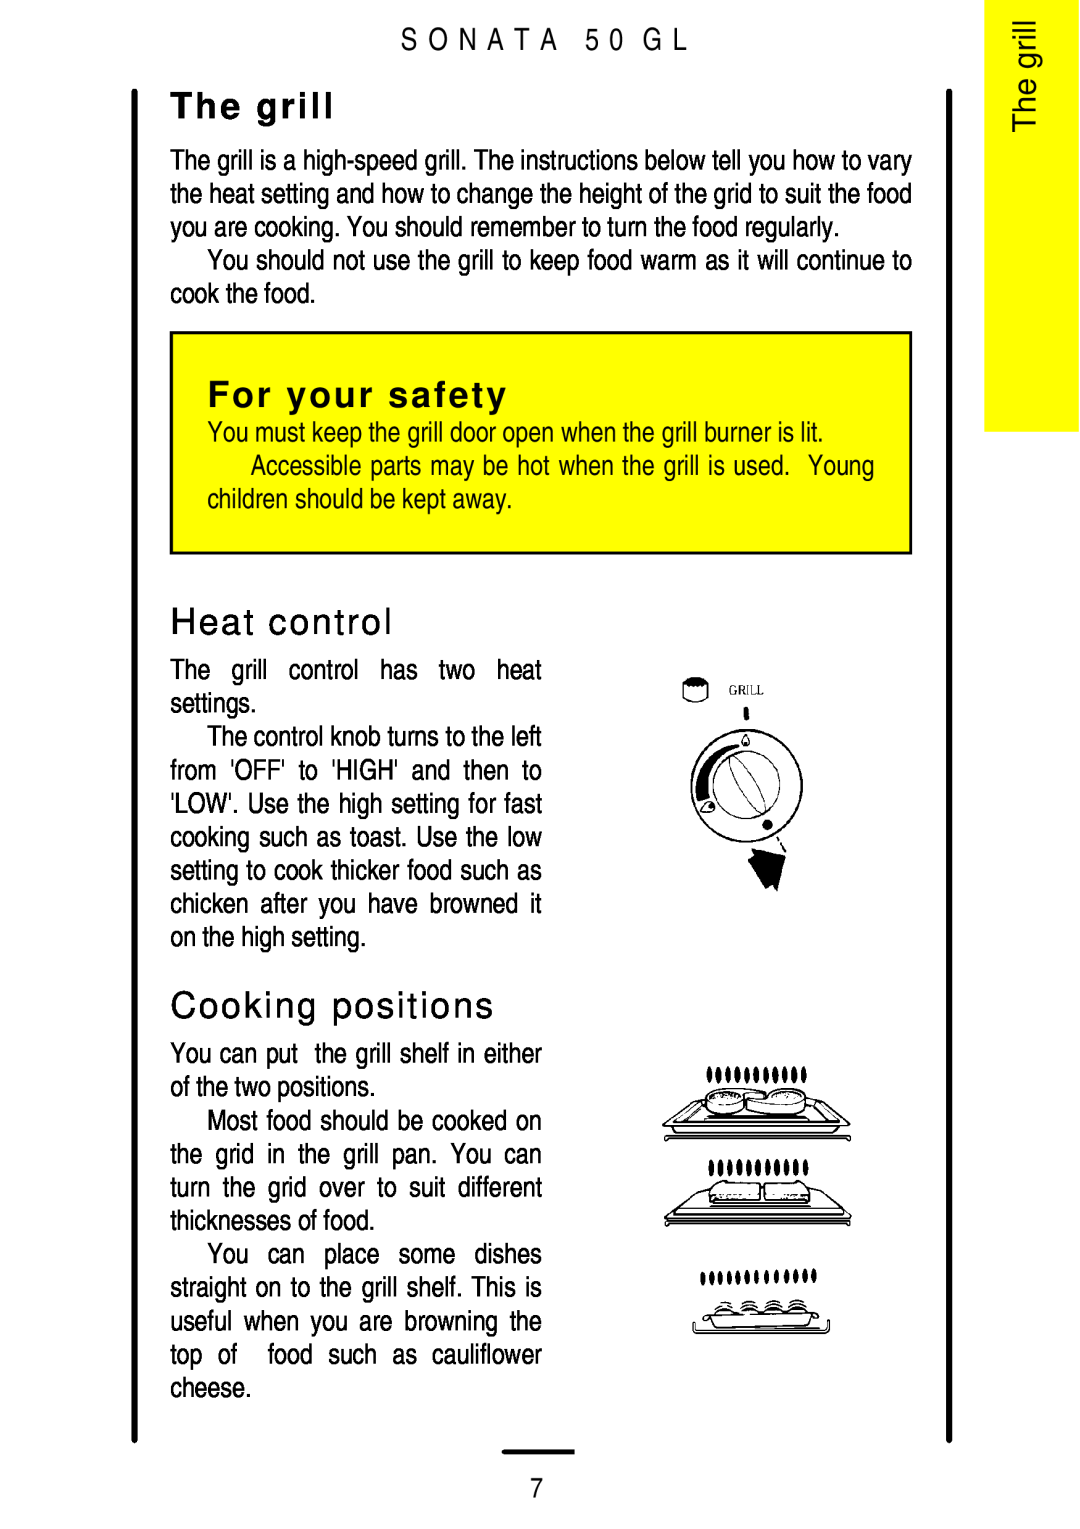 Electrolux installation instructions The grill, Heat control, Cooking positions, For your safety, S O N A T A 5 0 G L 